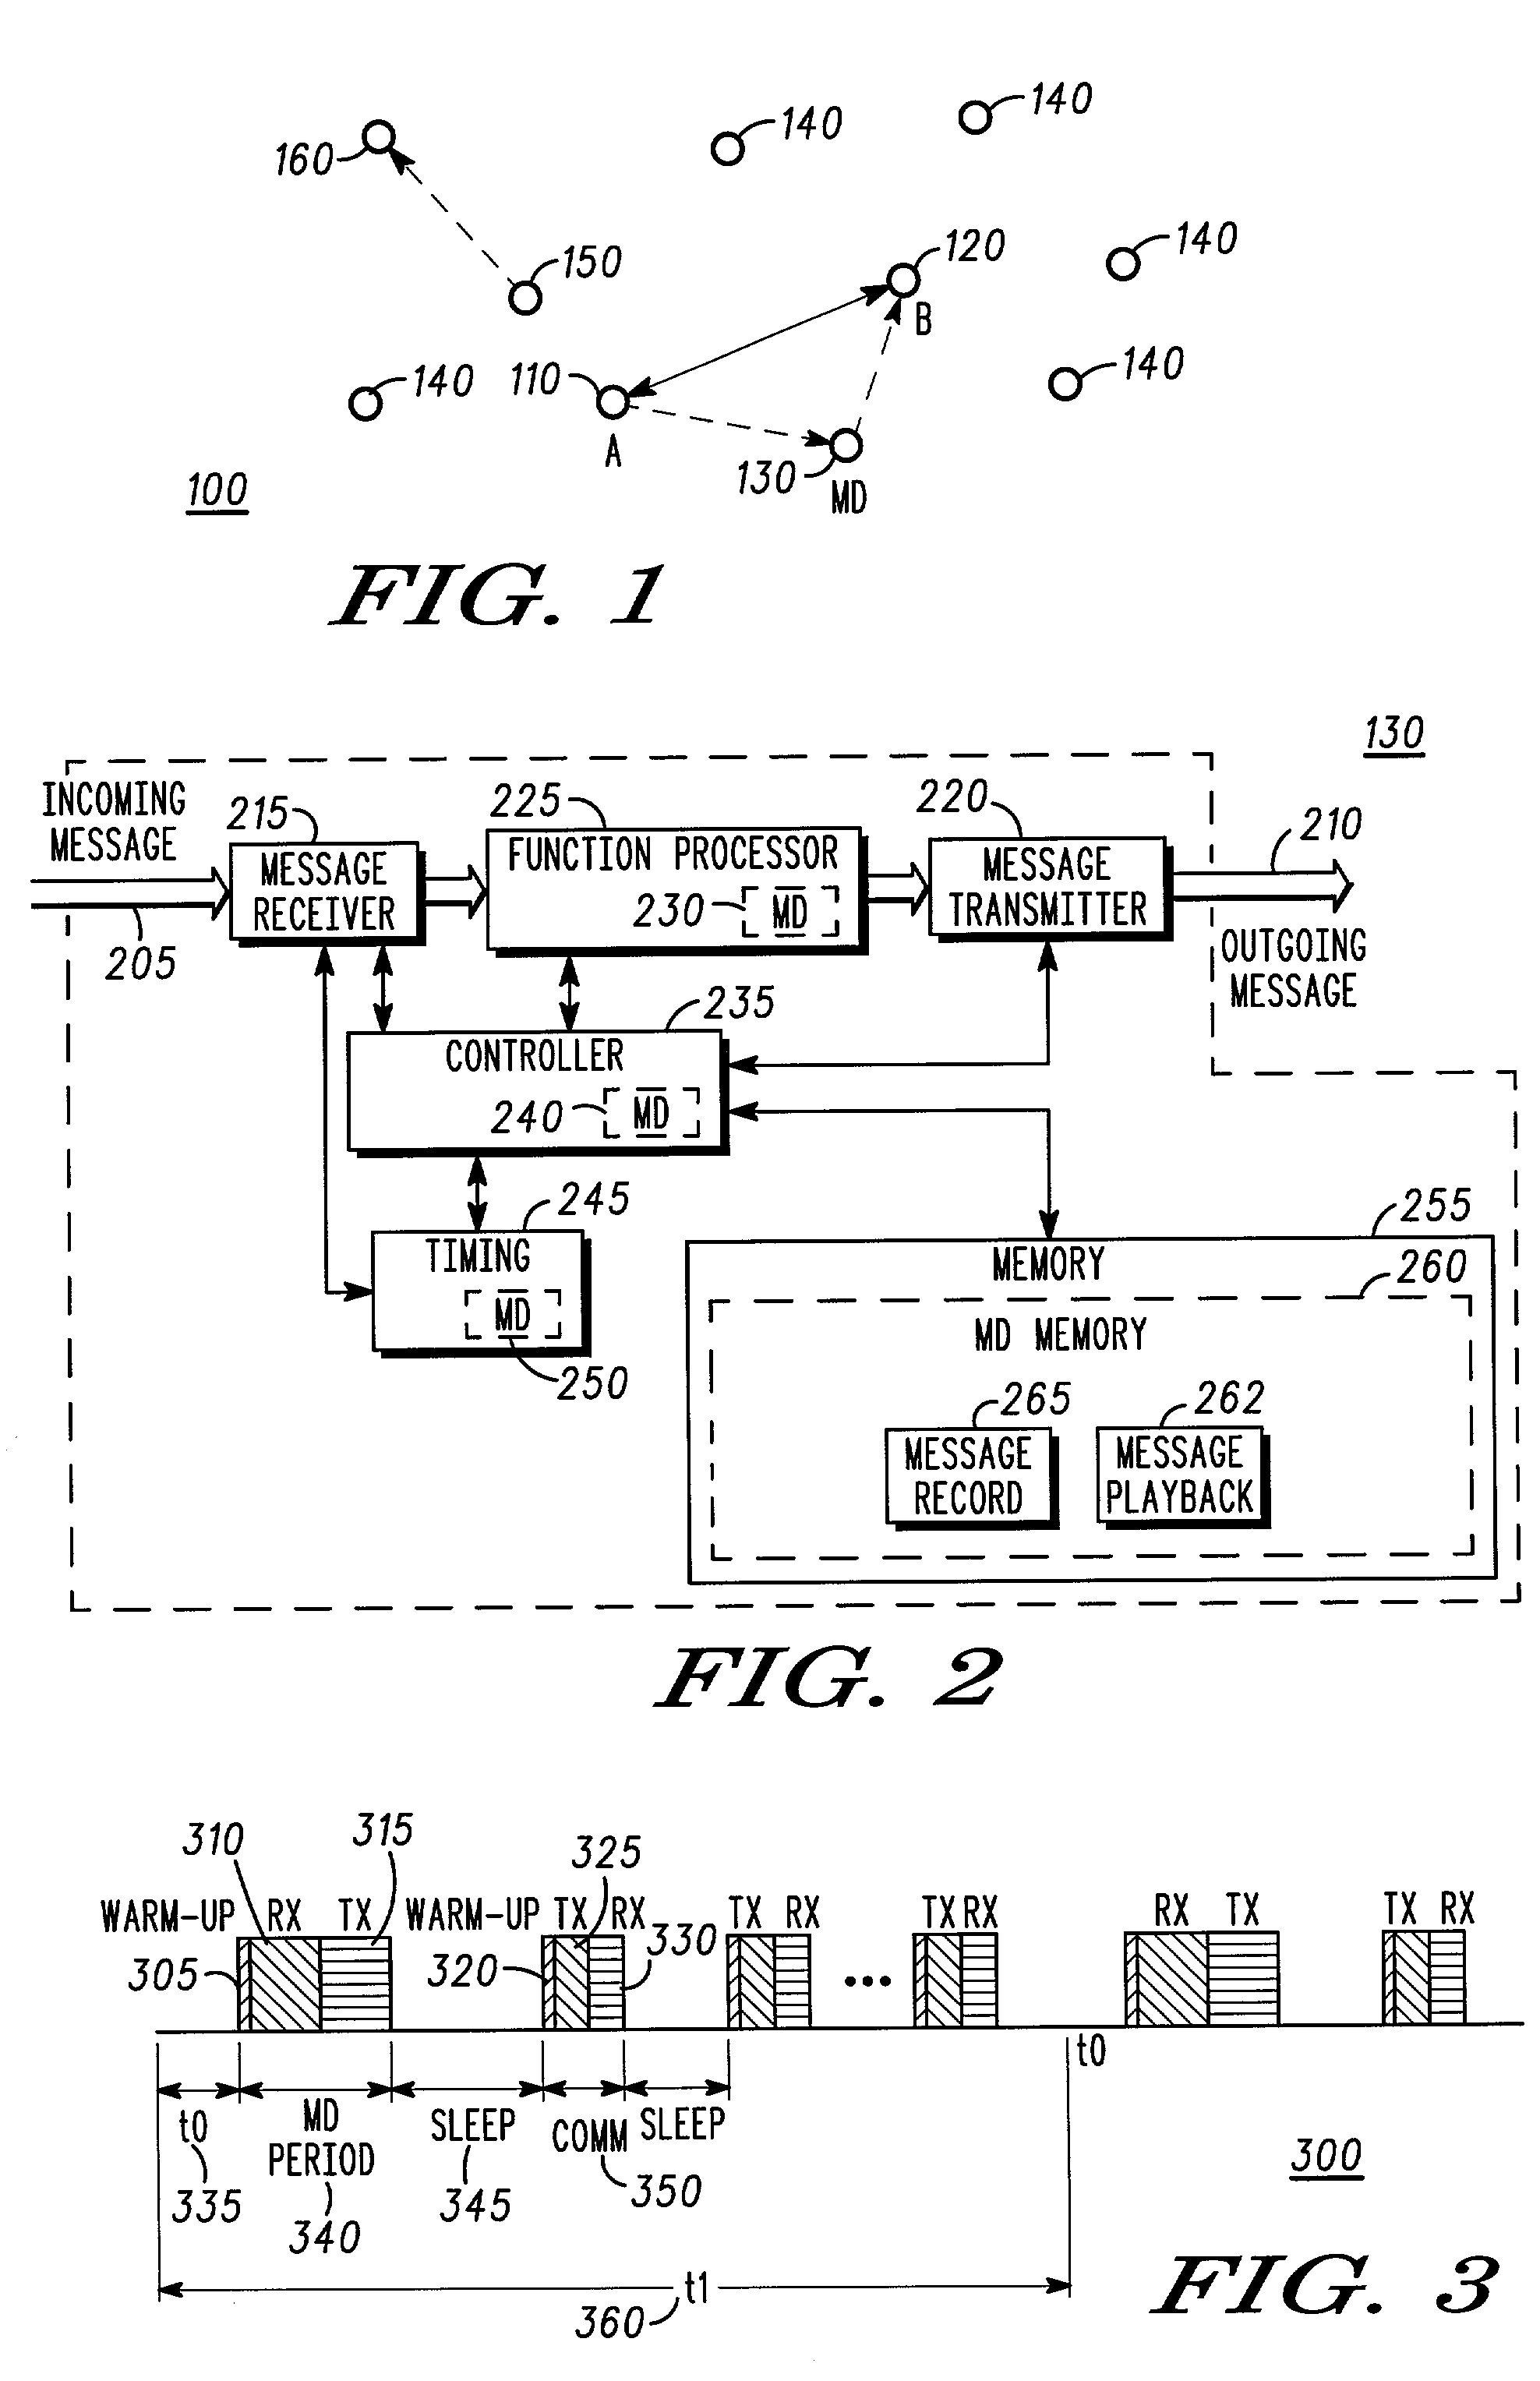 System and method for asynchronous communications employing direct and indirect access protocols